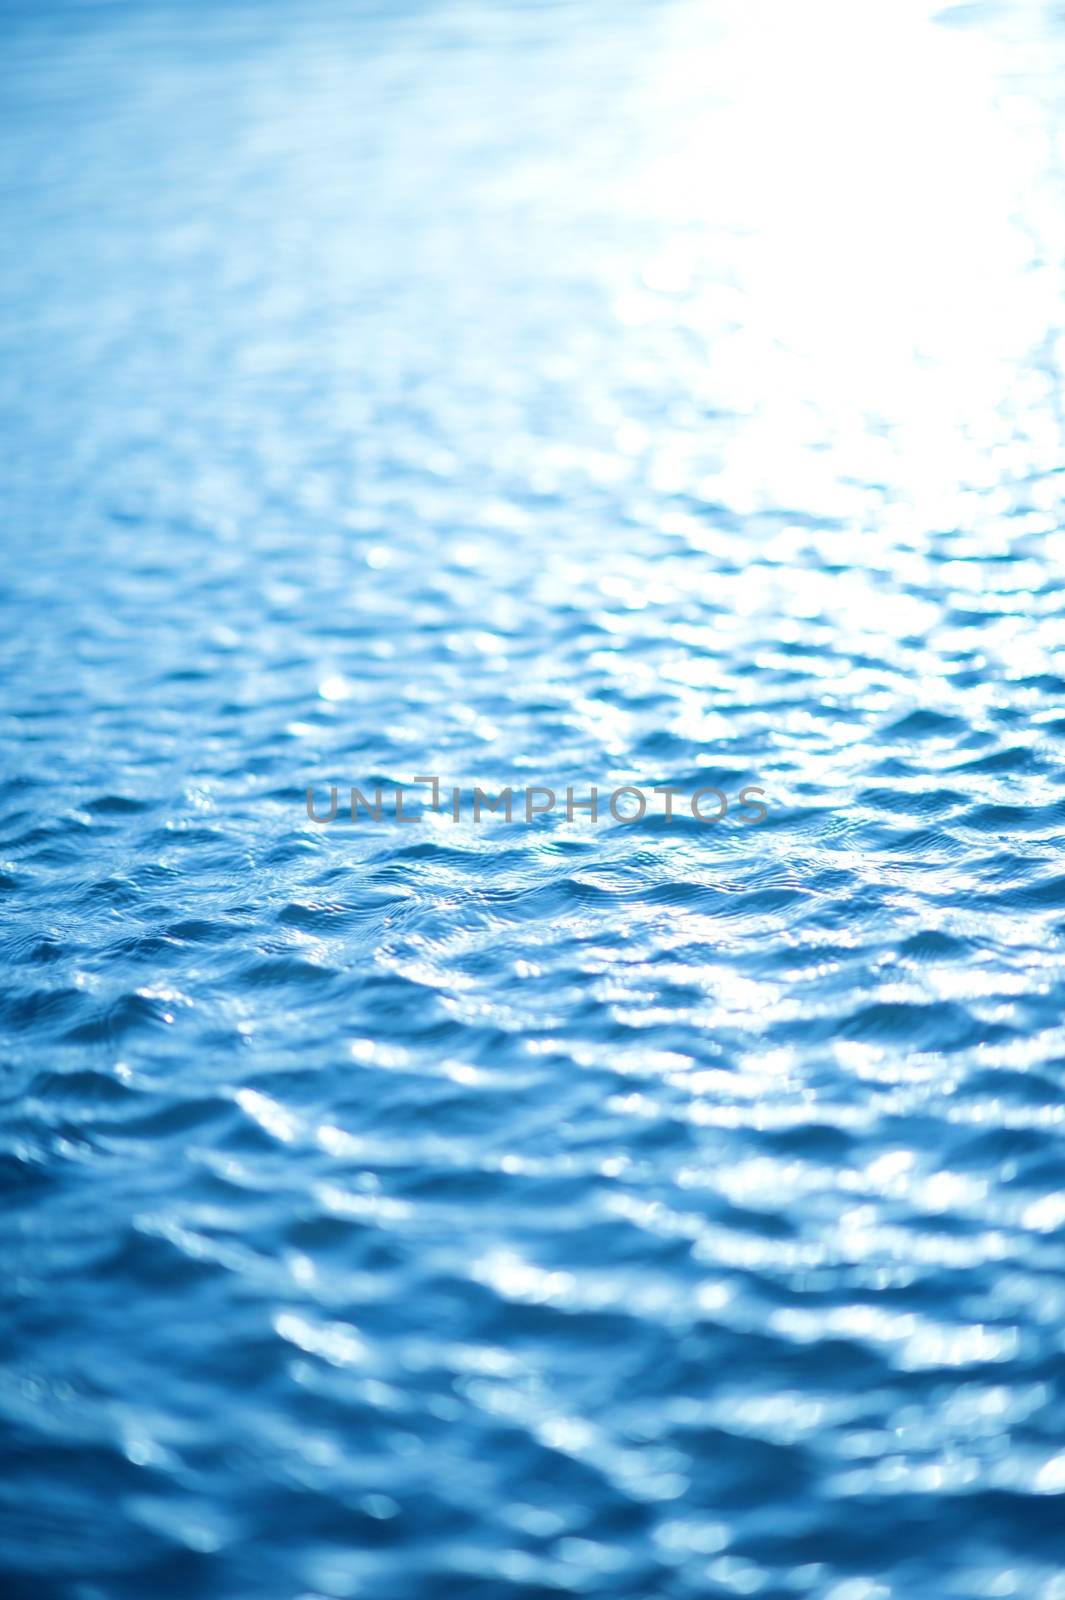 Water Waves Background by welcomia